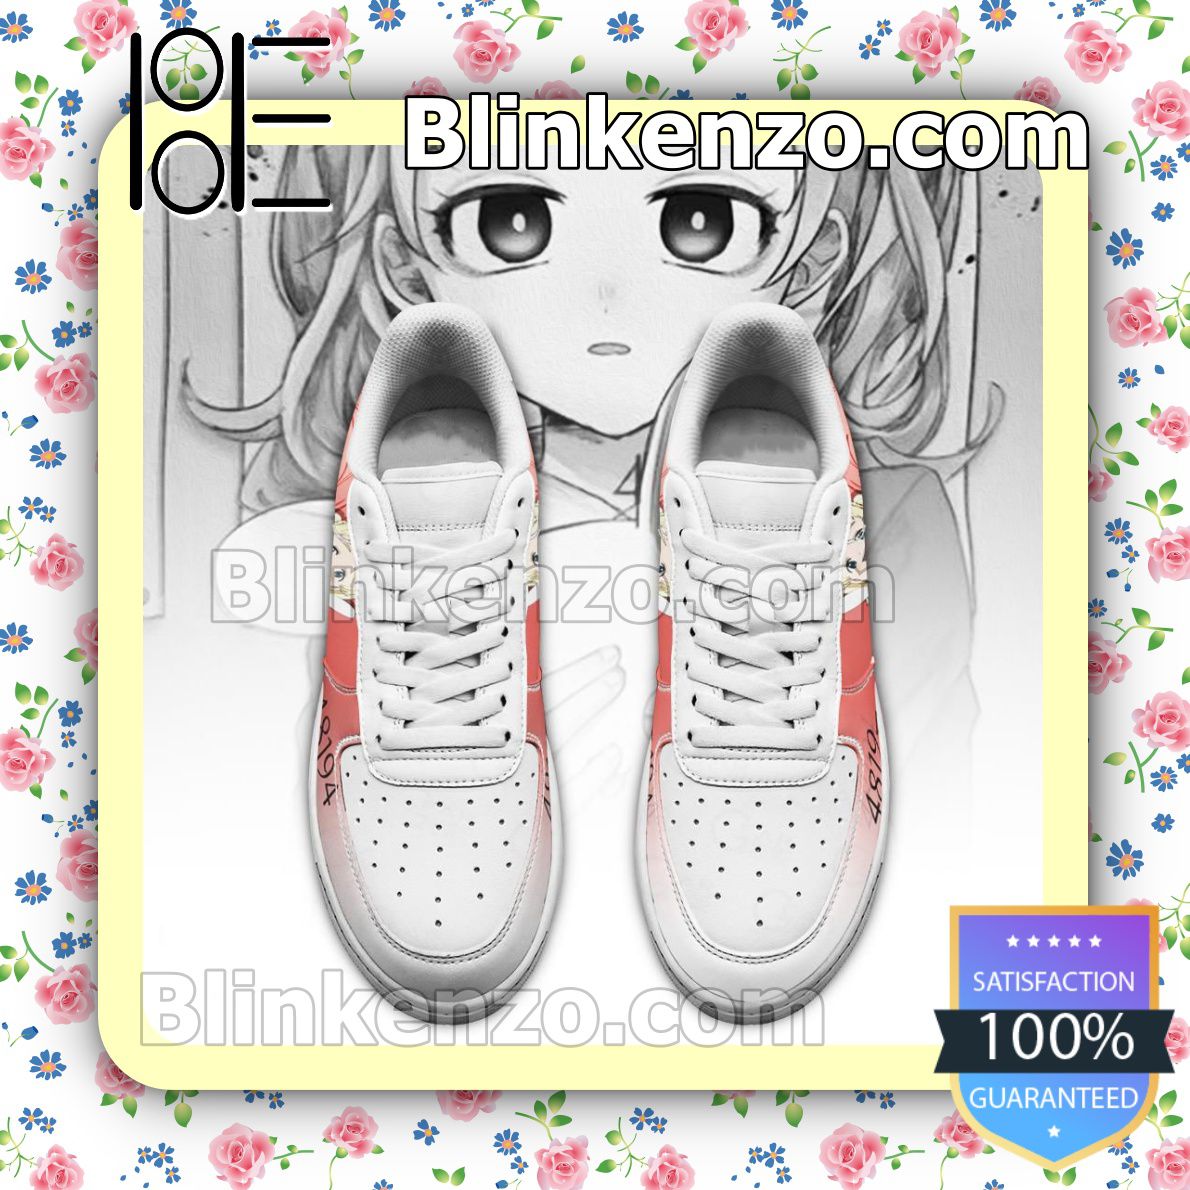 Adorable Conny The Promised Neverland Anime Anime Gifts Nike Air Force Sneakers